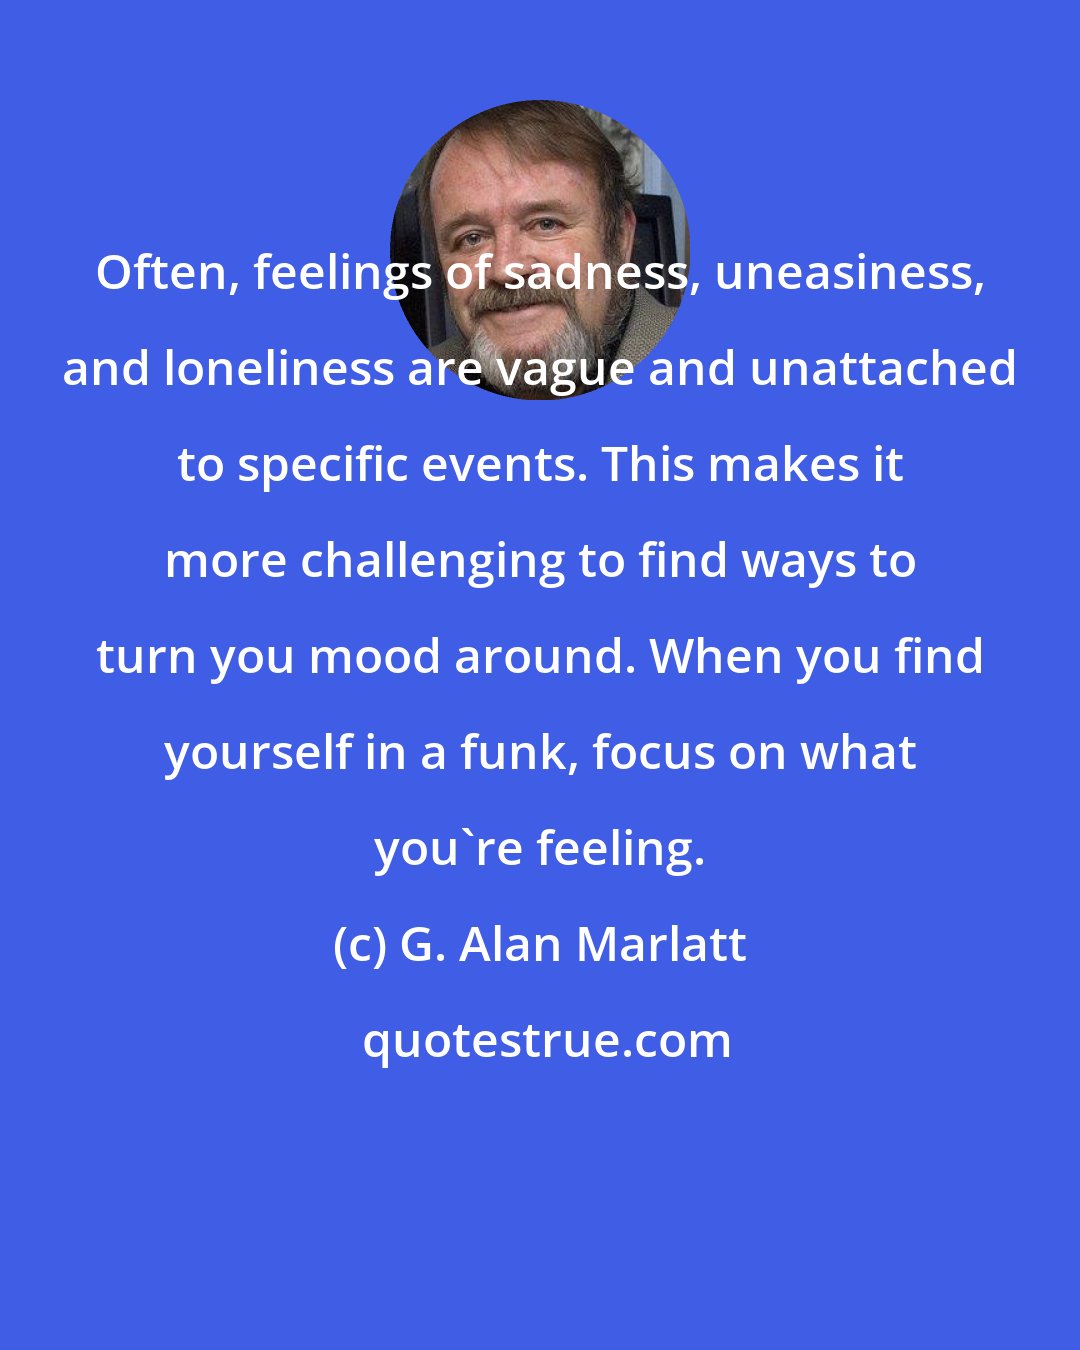 G. Alan Marlatt: Often, feelings of sadness, uneasiness, and loneliness are vague and unattached to specific events. This makes it more challenging to find ways to turn you mood around. When you find yourself in a funk, focus on what you're feeling.